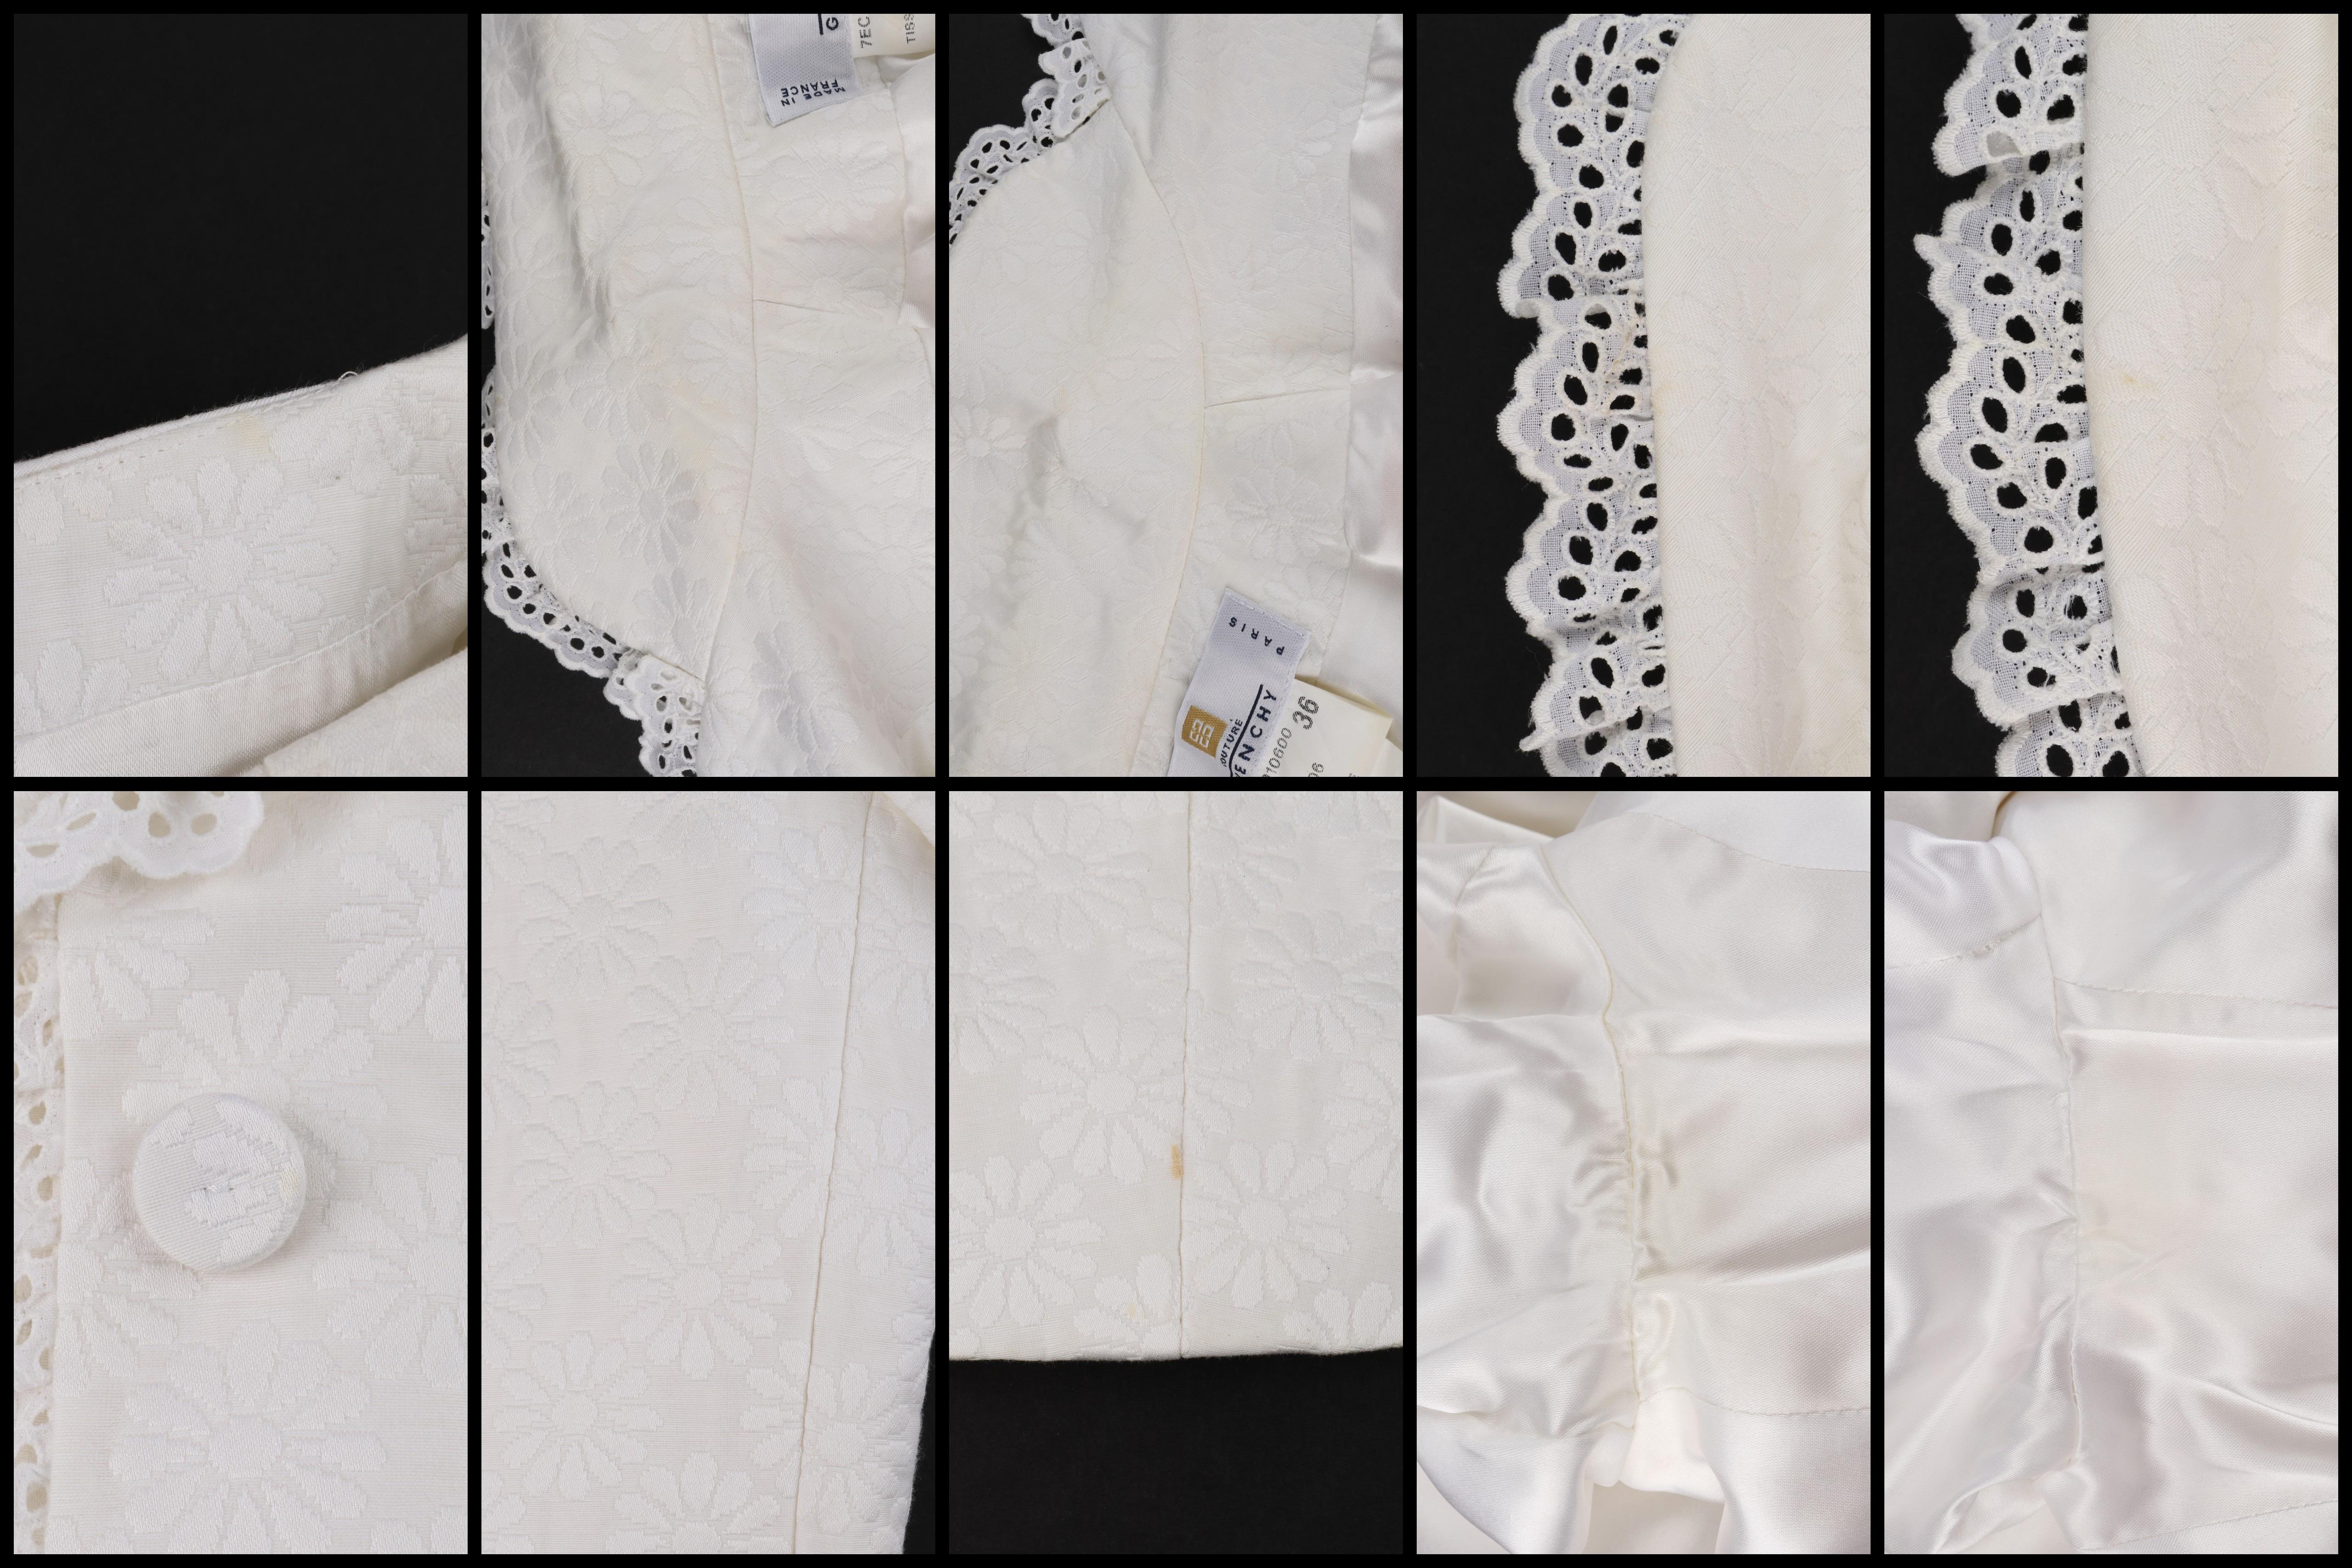 GIVENCHY A/W 1996 JOHN GALLIANO White Floral Brocade Lace Skirt Suit Blazer Set 4